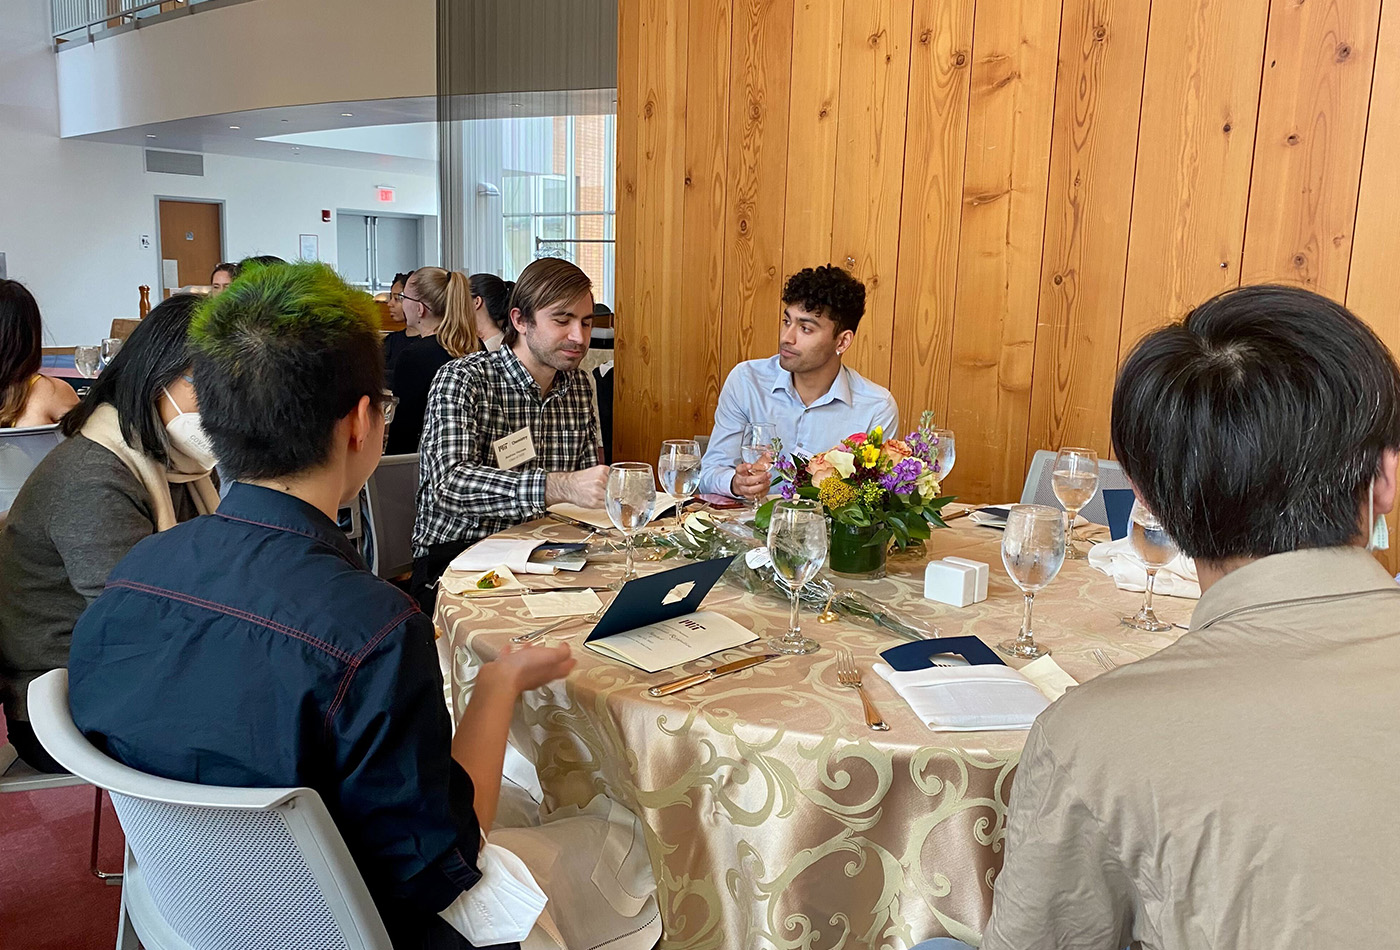 A group of students and faculty sit at a table.